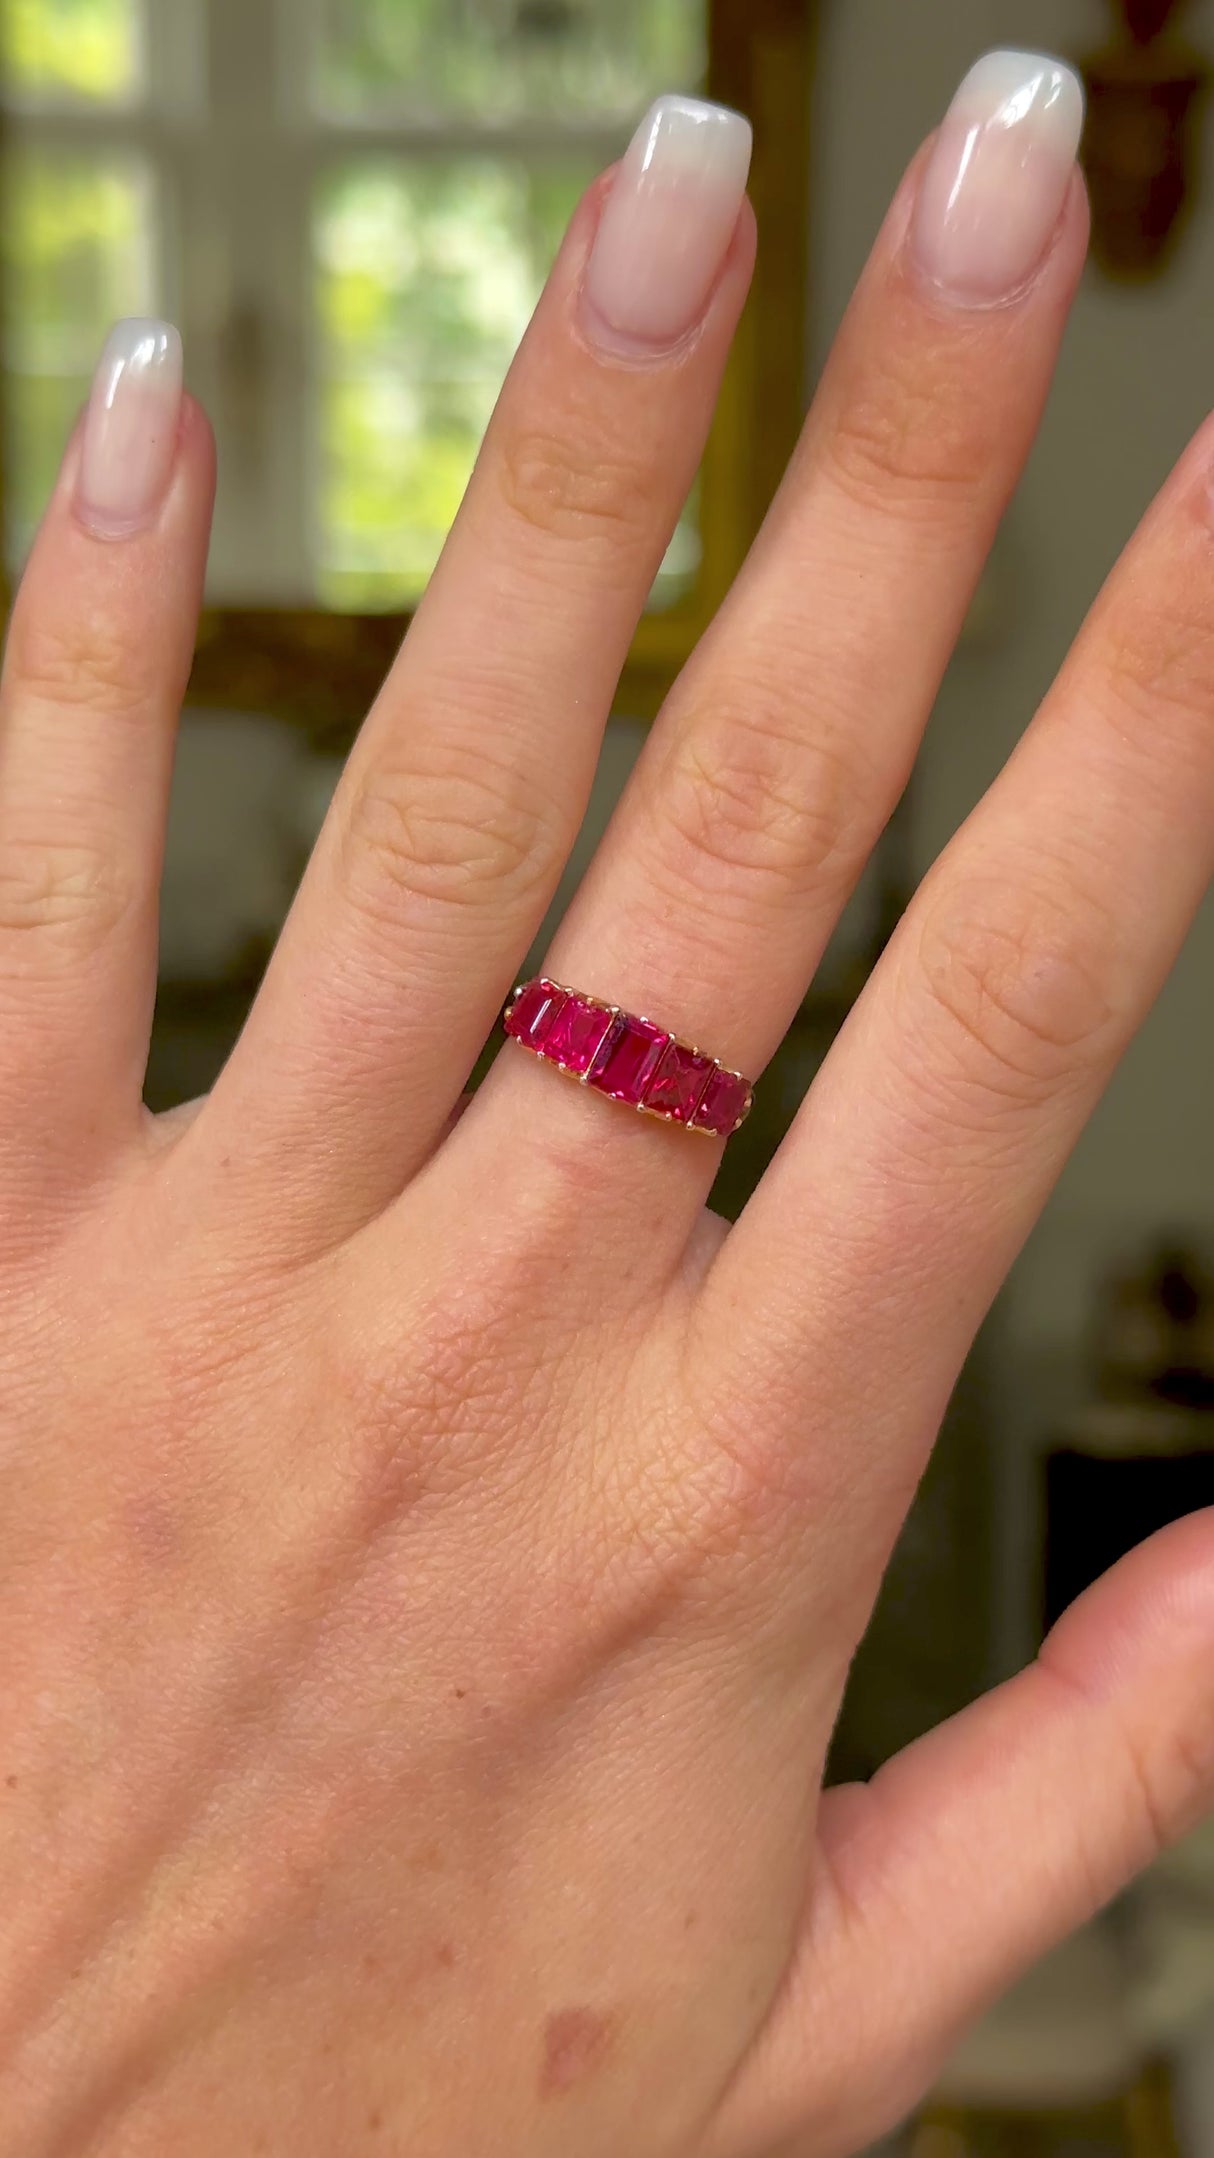 Antique spinel half hoop ring, worn on hand and moved around to give perspective. 